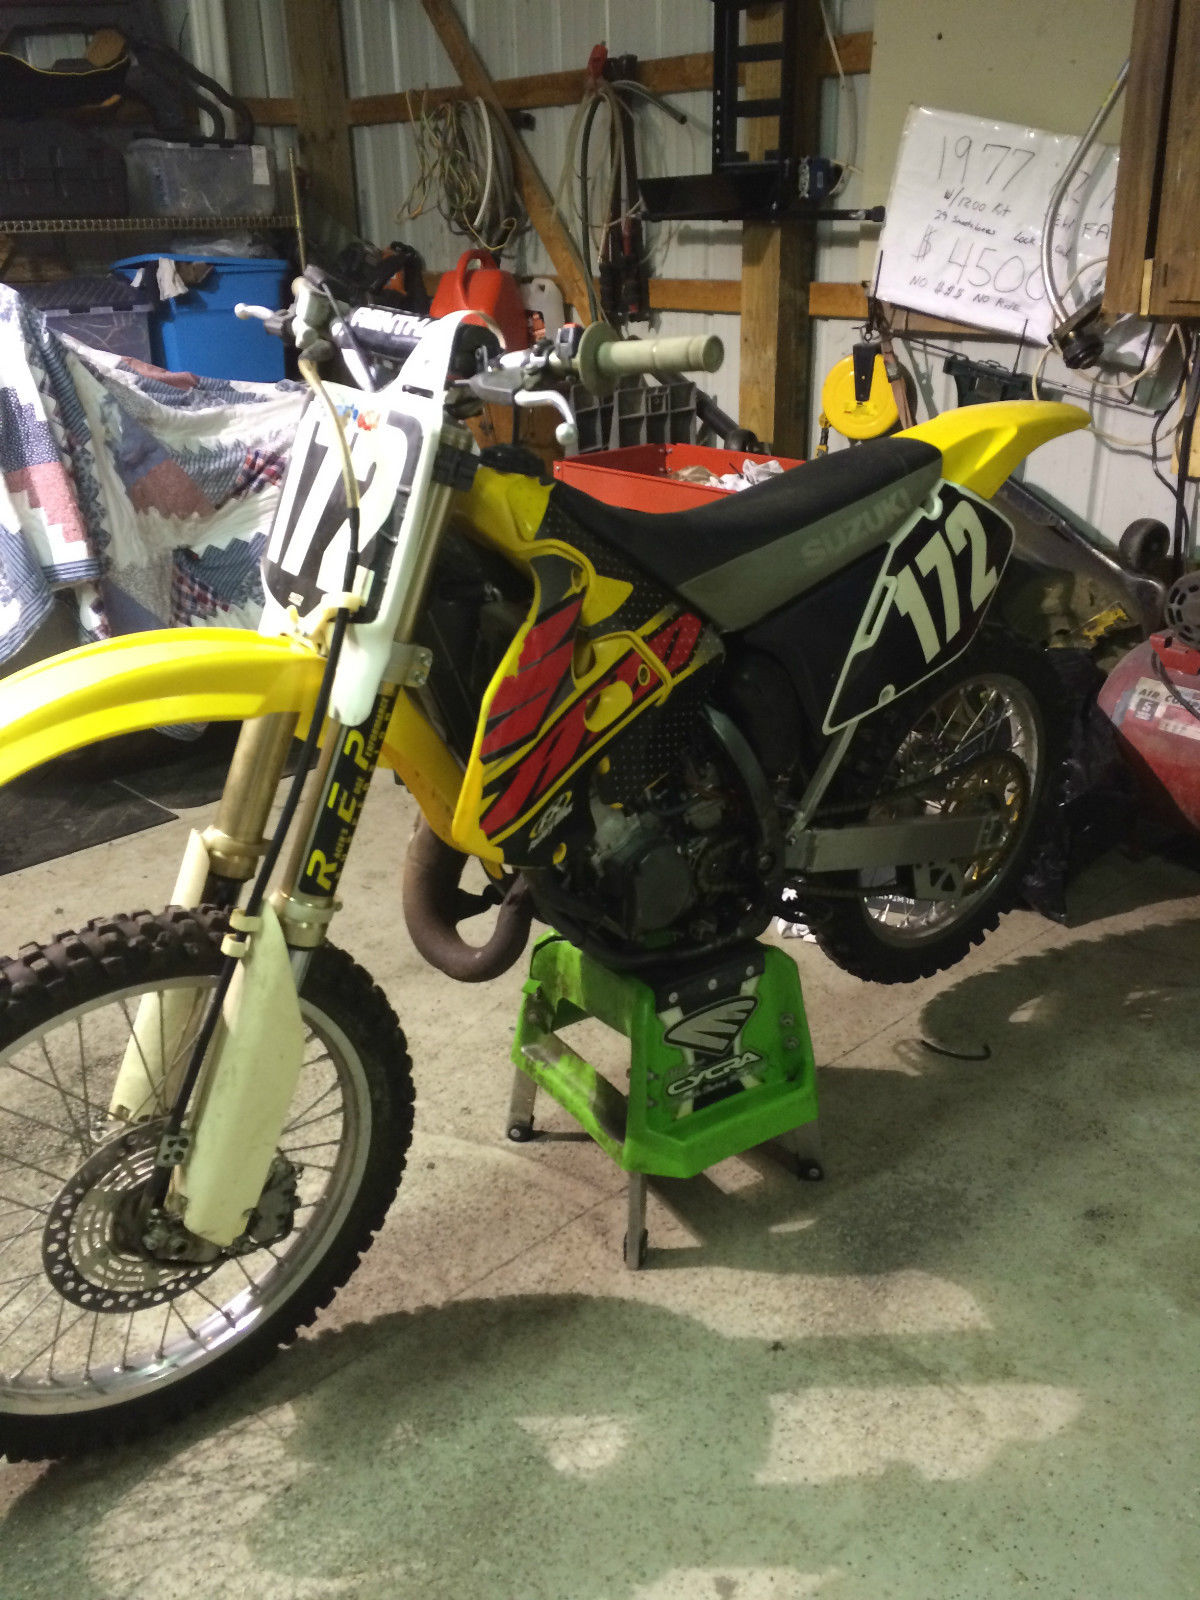 Suzuki RM 125 2stroke Runs great with upgrades and extra